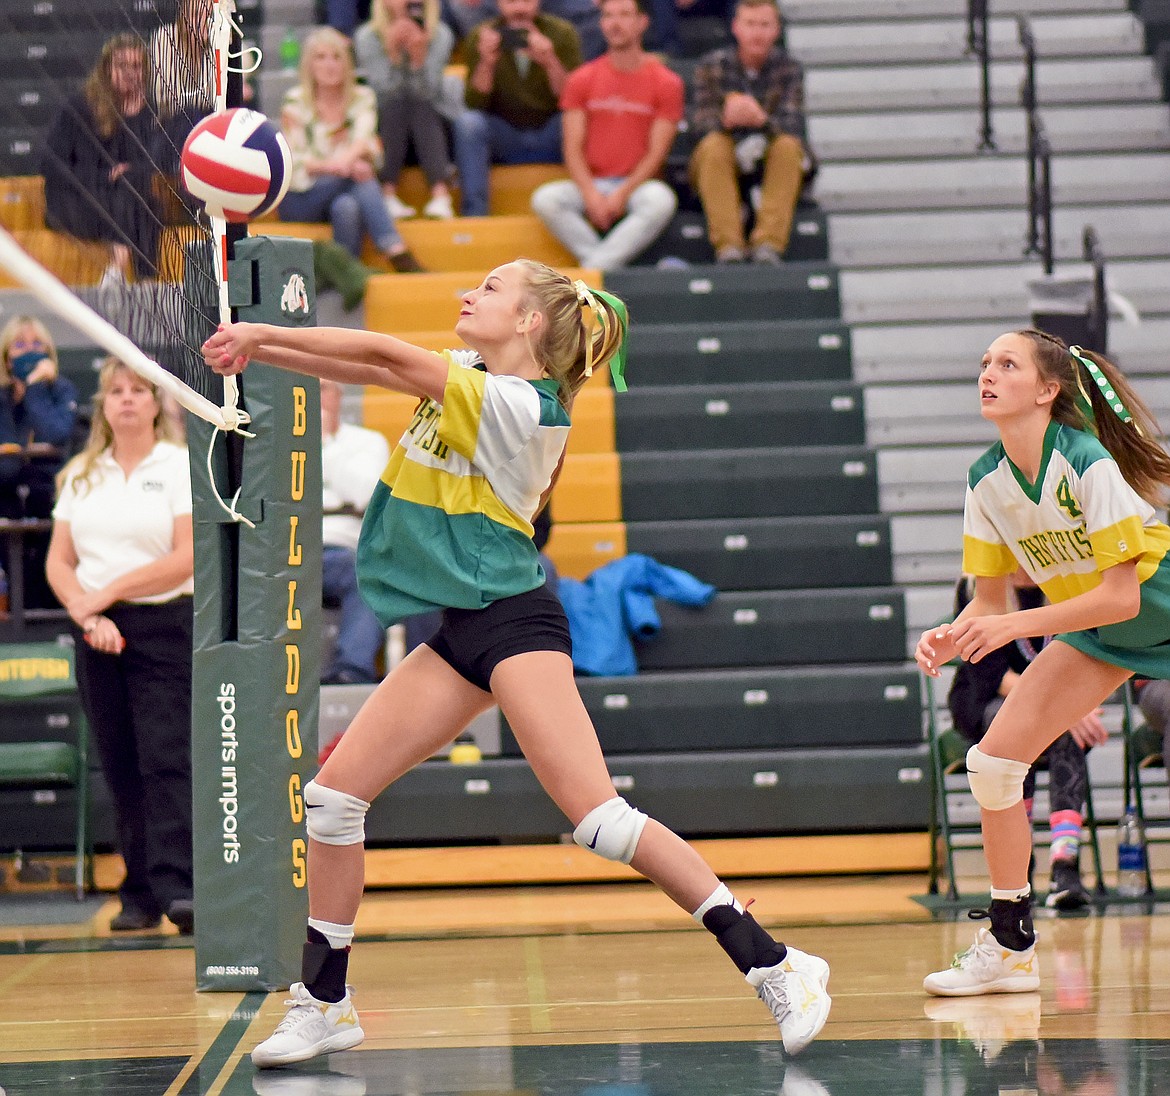 Whitefish freshman Kaydence Blackwell makes a pass on the front row during a match against Browning on Tuesday, Sept. 28 in Whitefish. (Whitney England/Whitefish Pilot)